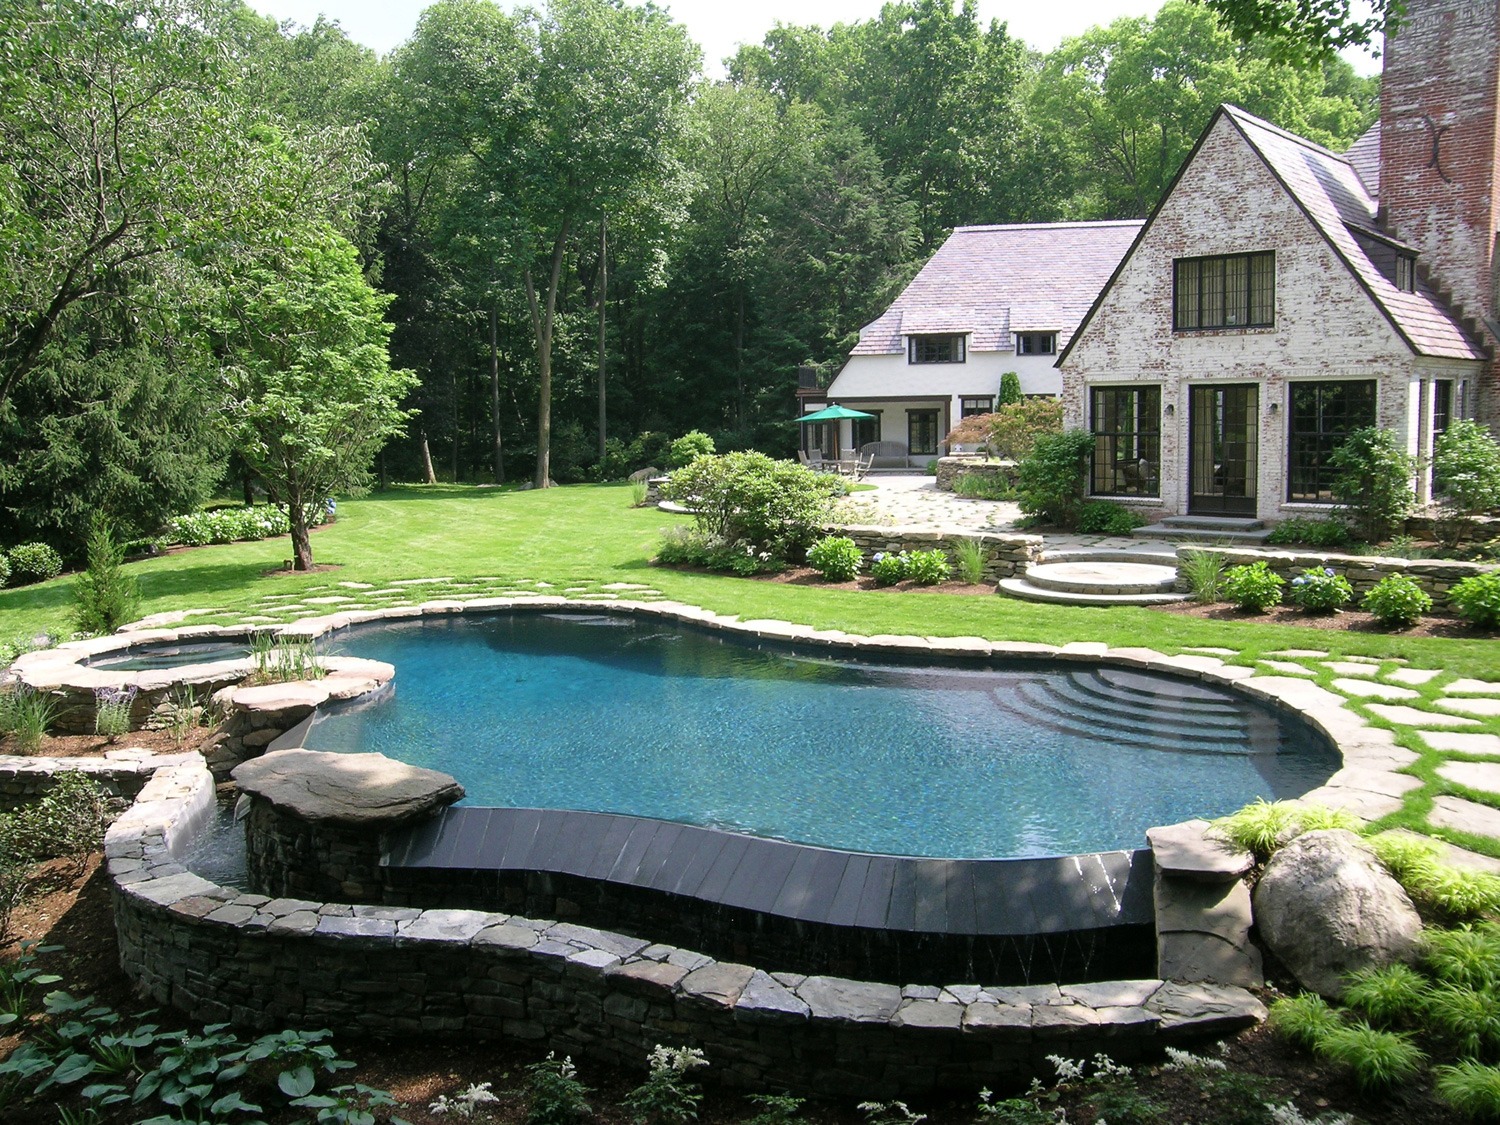 An elegantly landscaped backyard with a curvy swimming pool, stone borders, manicured lawns, and a charming house with large windows and a sloping roof.